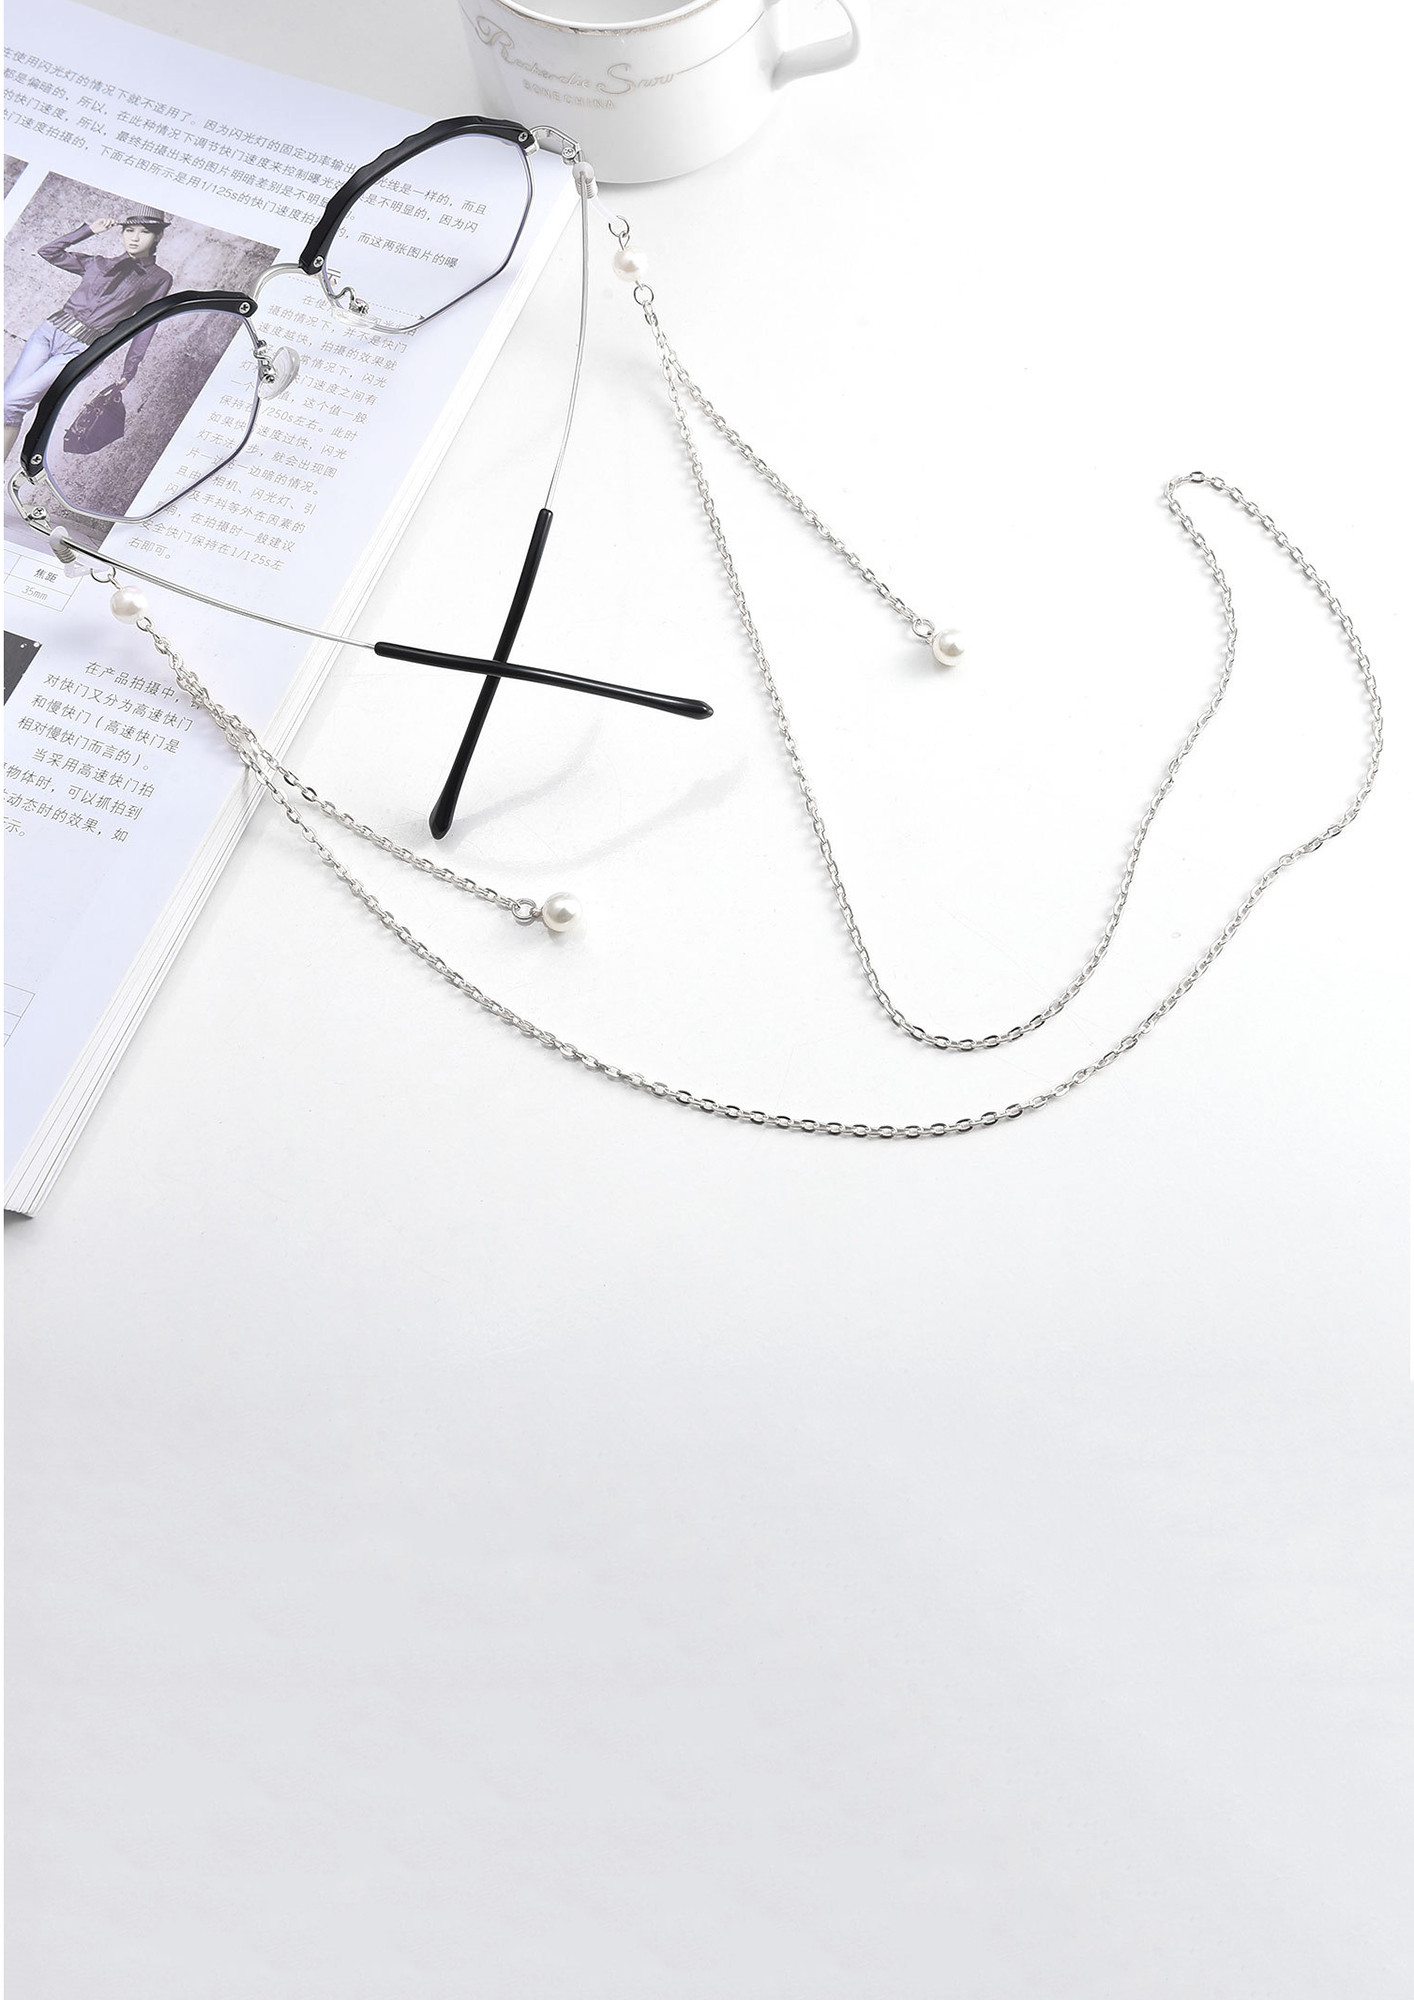 PLAY BASICS WITH THE SILVER GLASS CHAIN